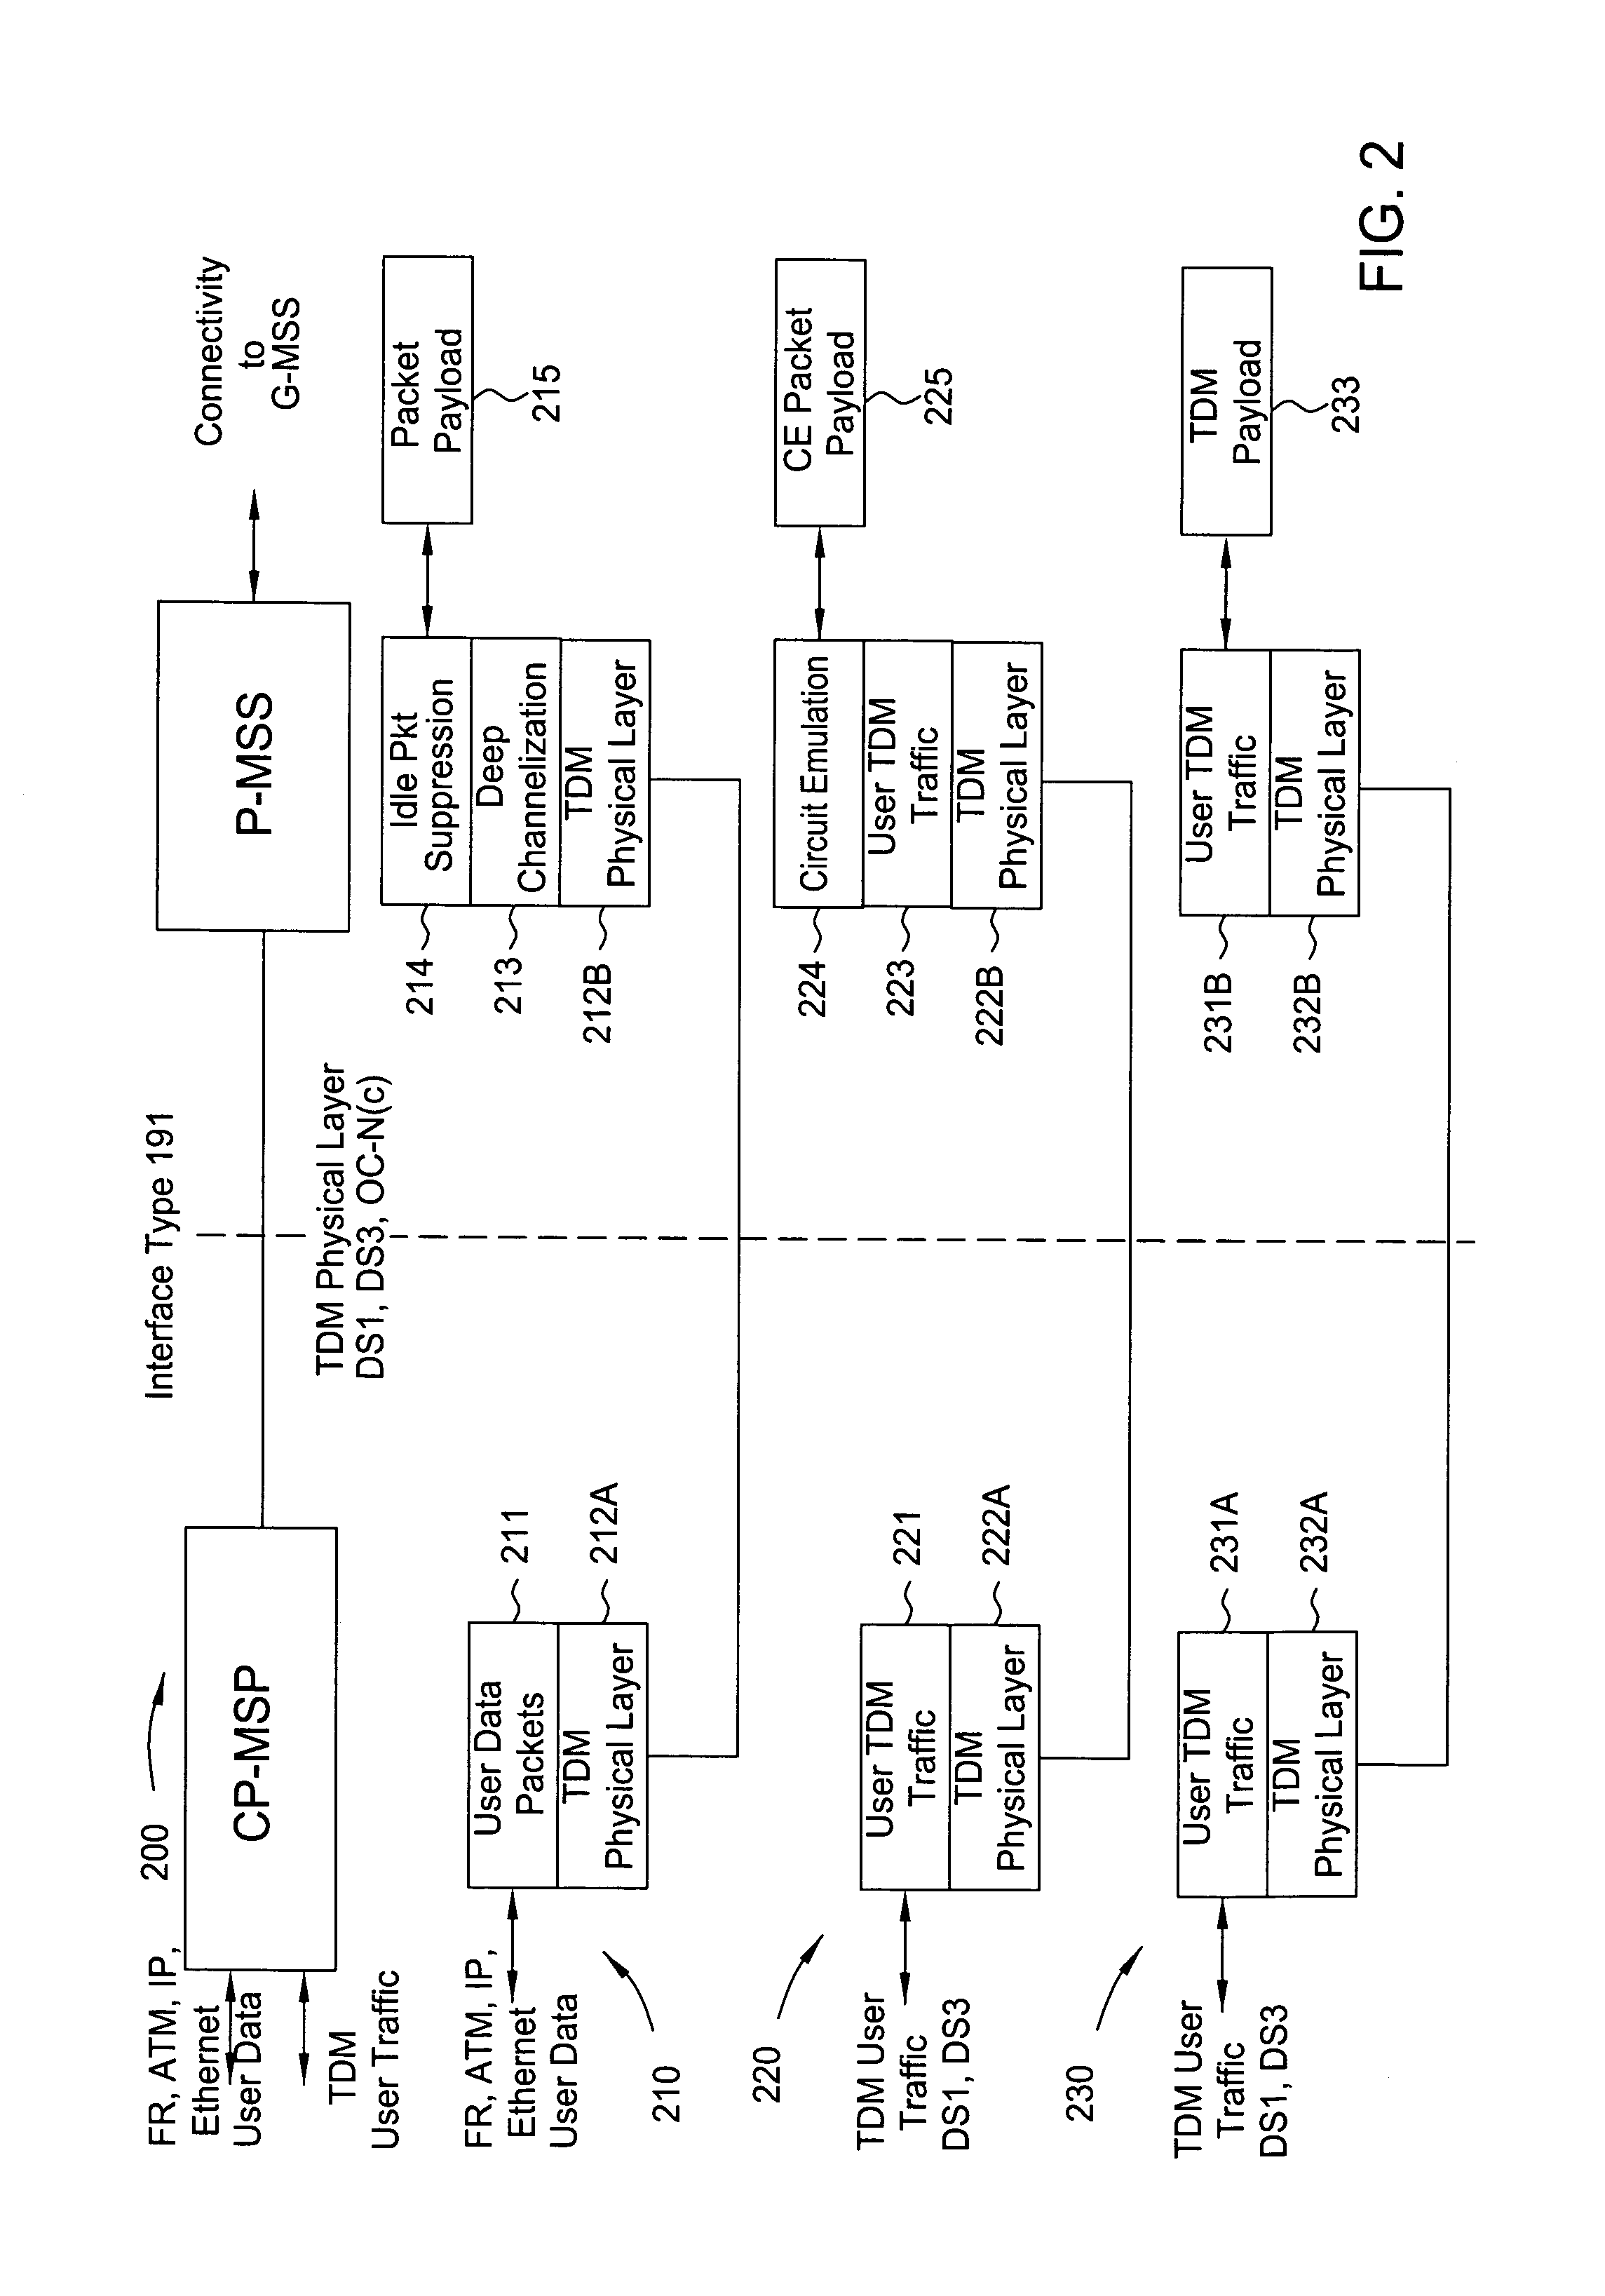 Network architecture for a packet aware transport network